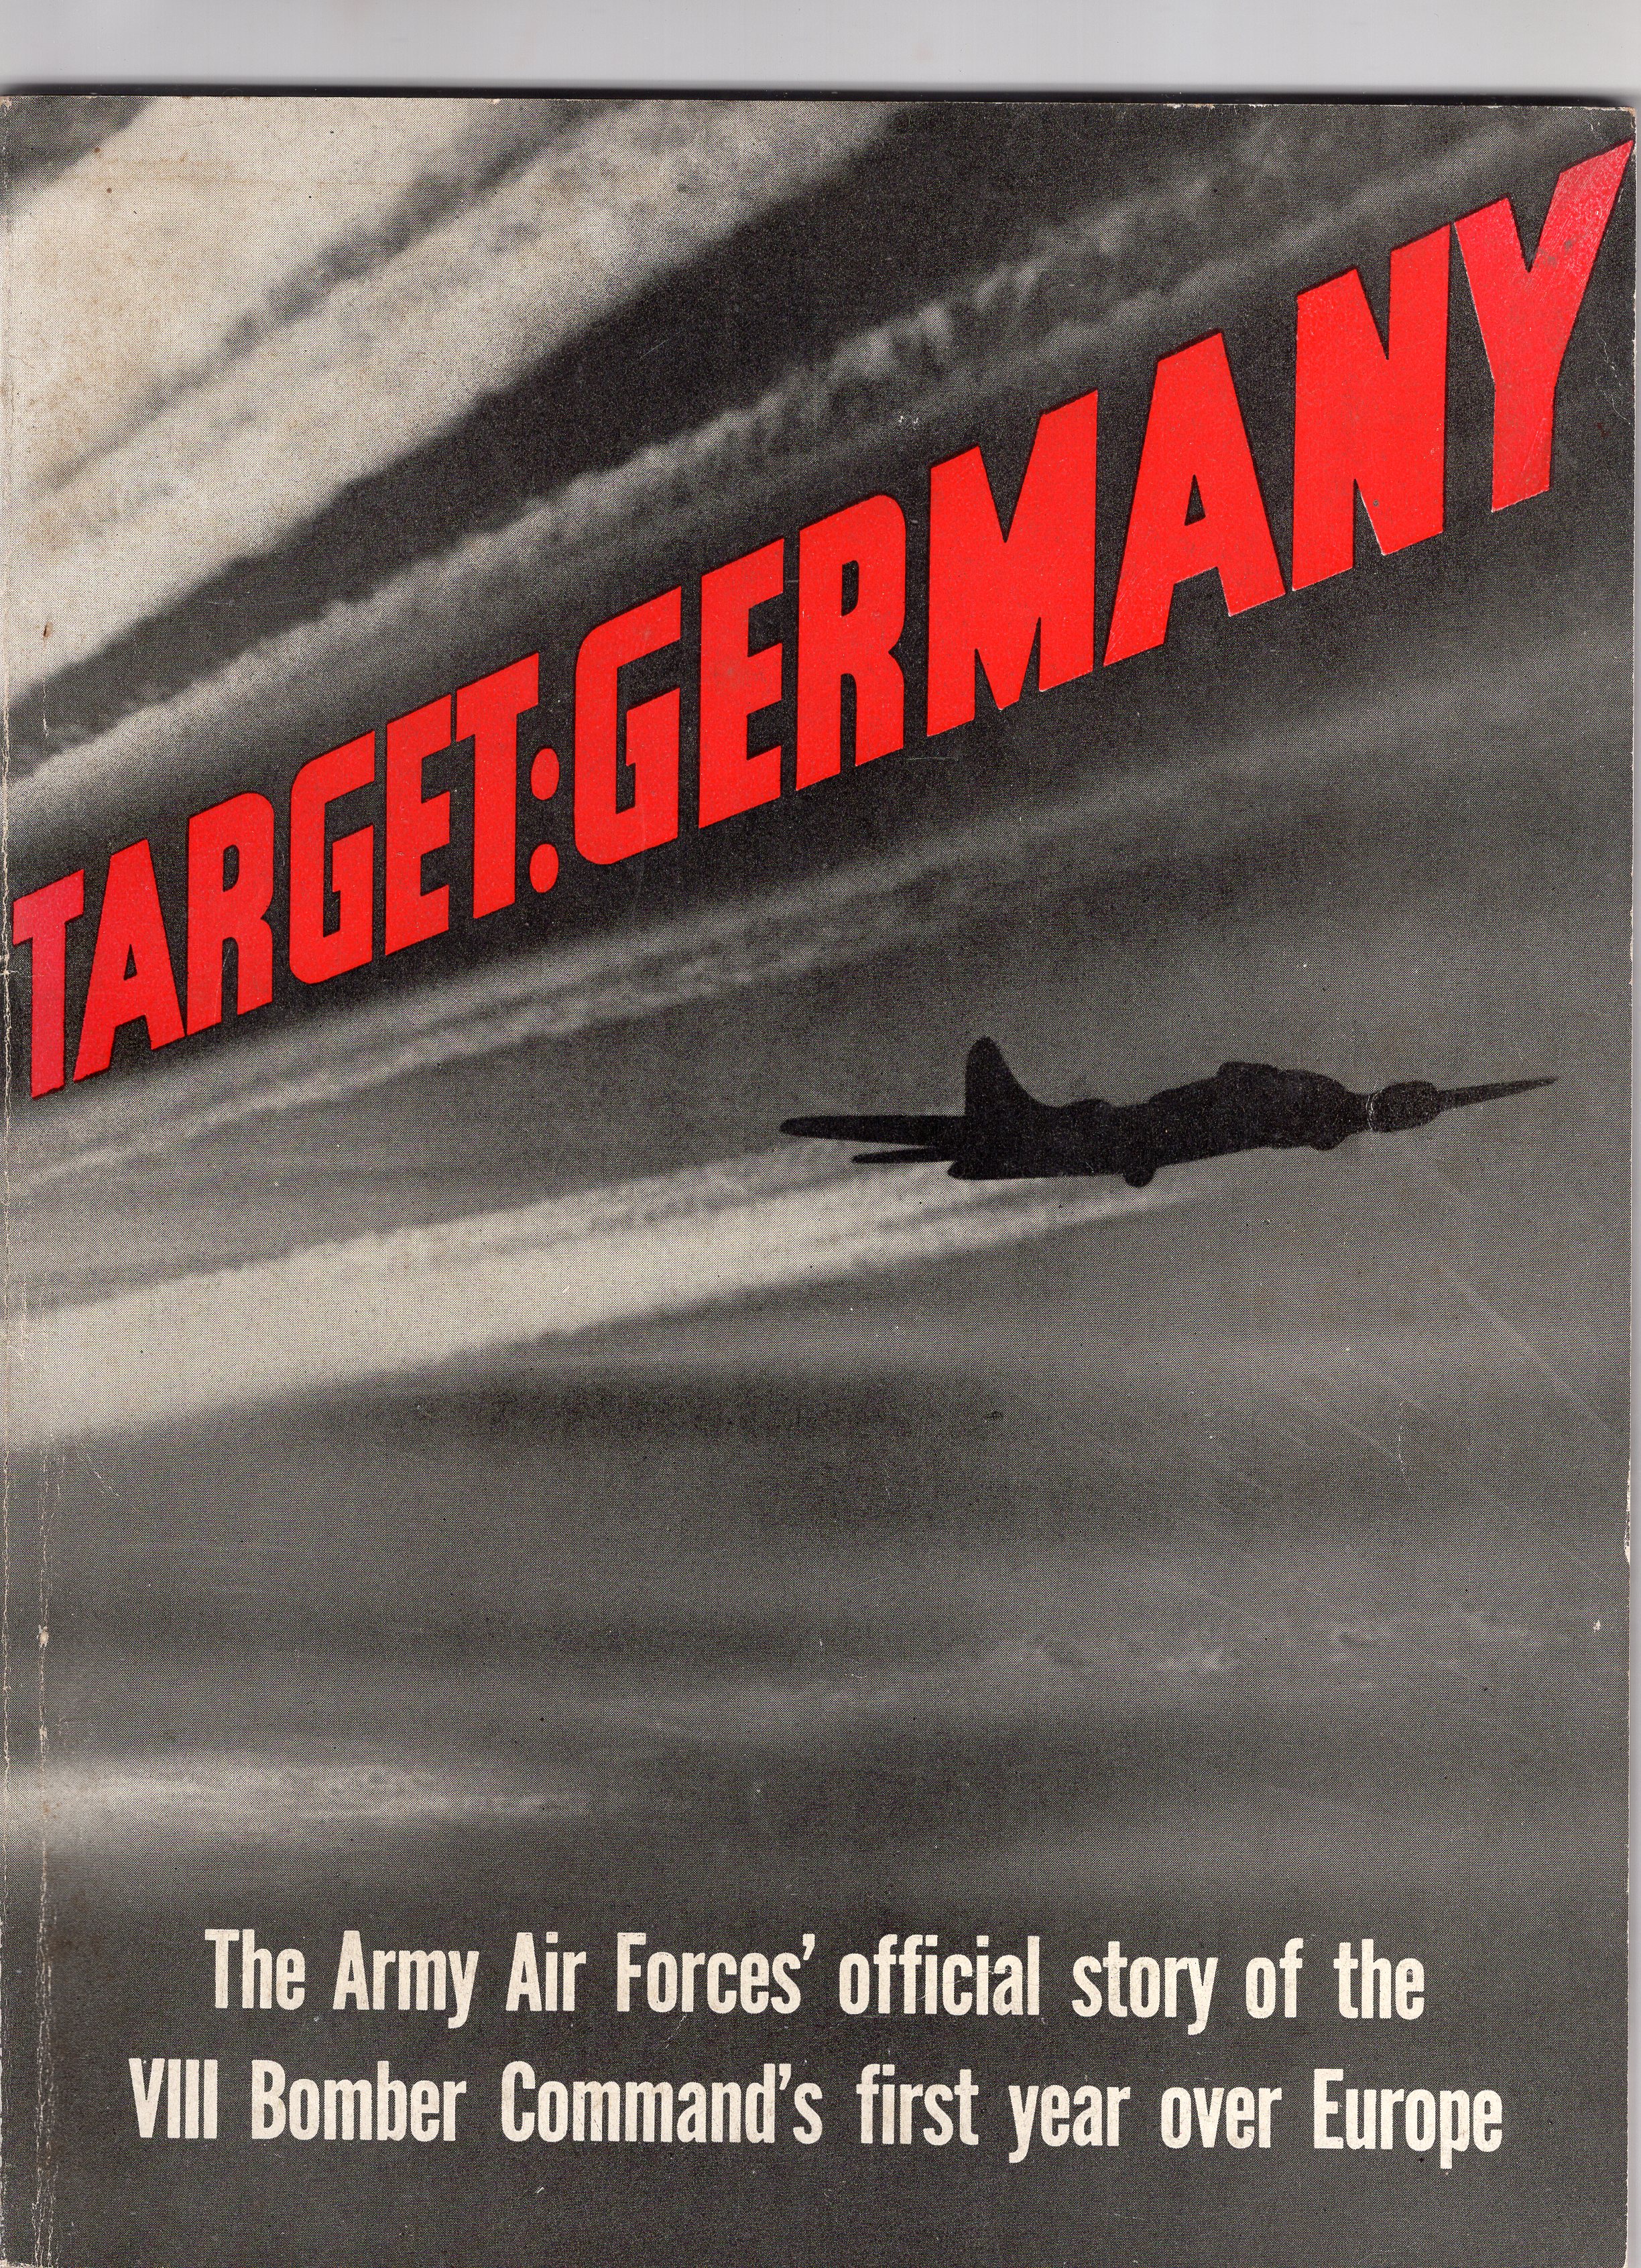  - Target: Germany - The Army Air Forces' official story of the VIII Bomber Command's first year over Europe.